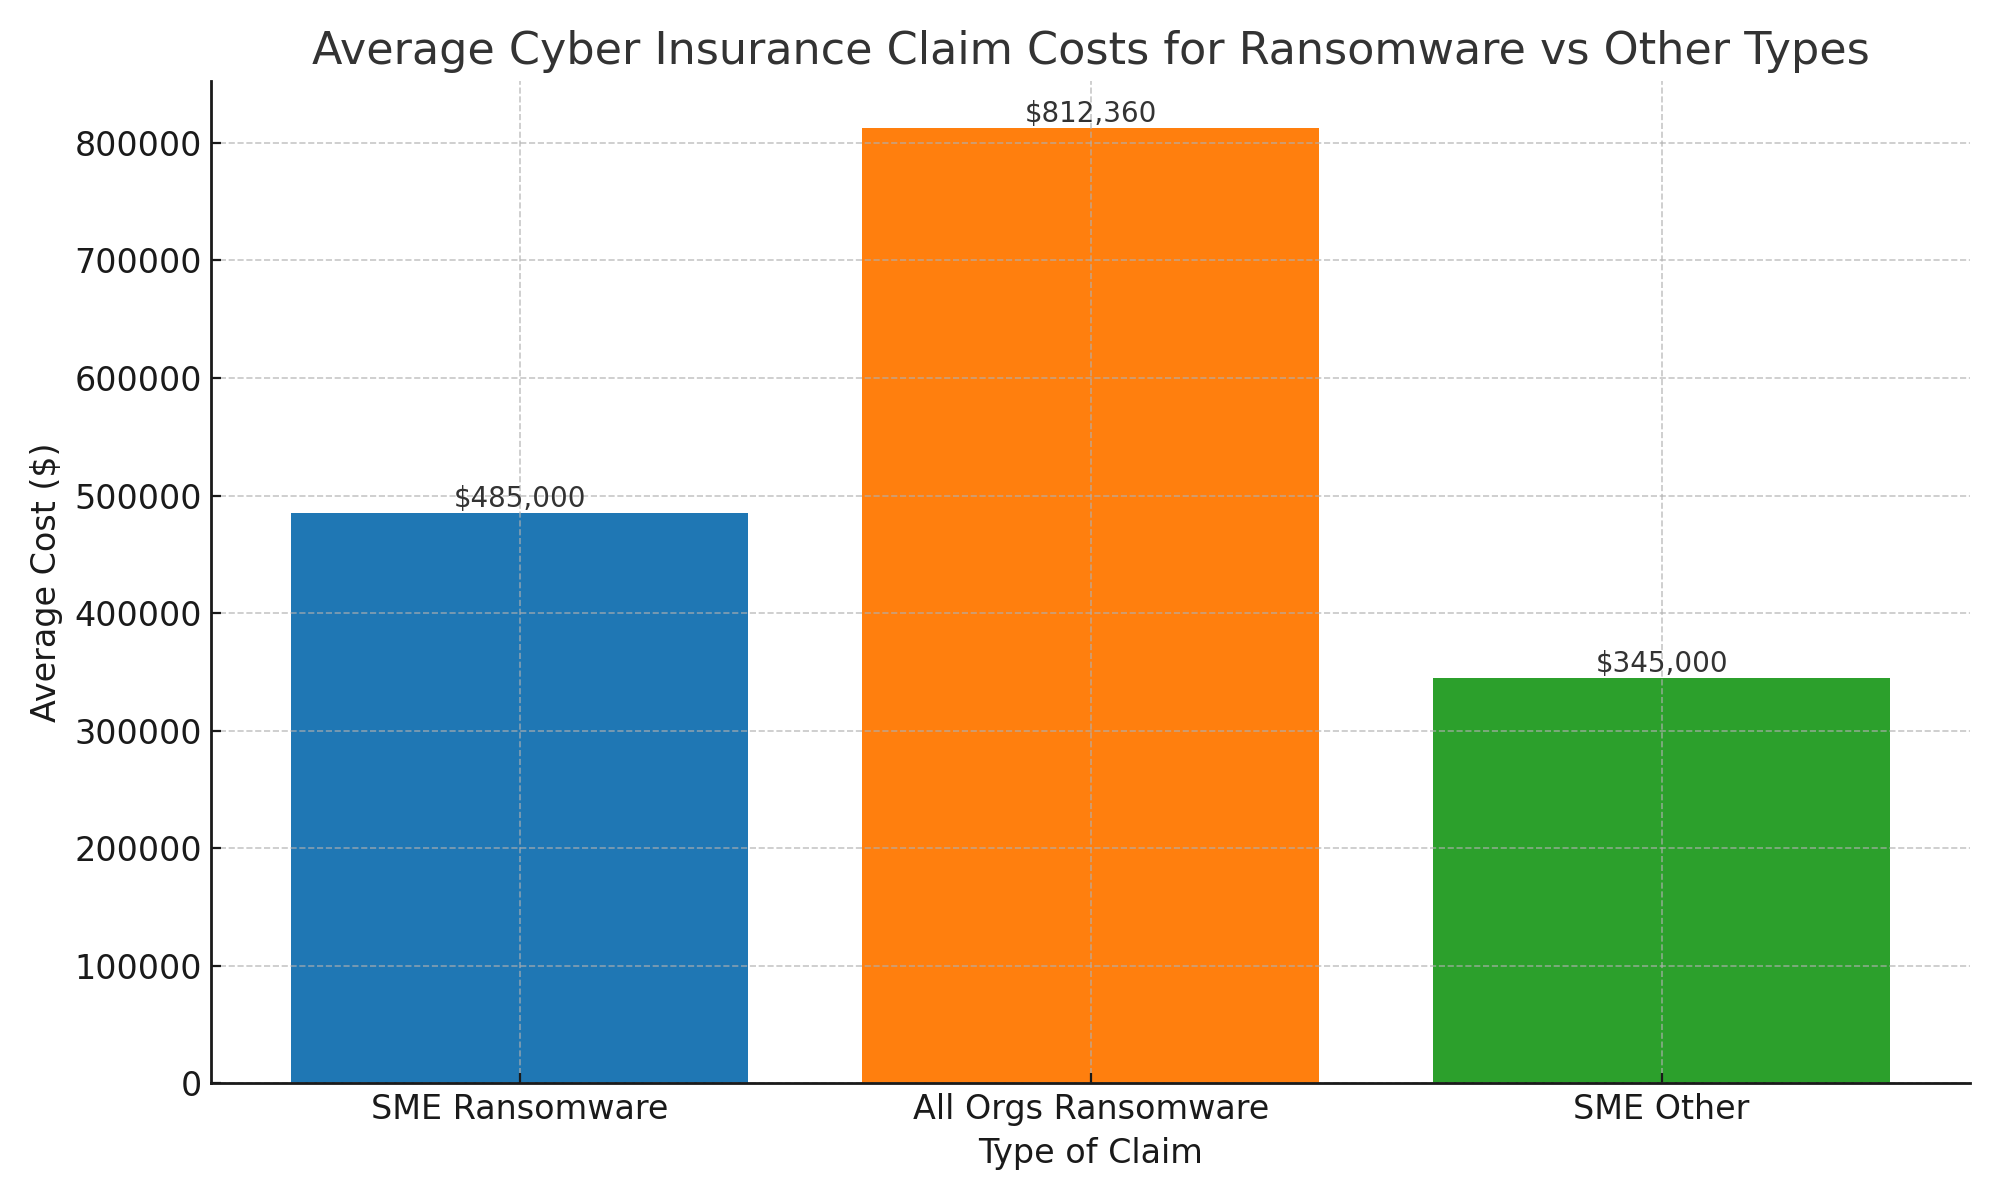 Cost of Average Cyber Insuracne Claims